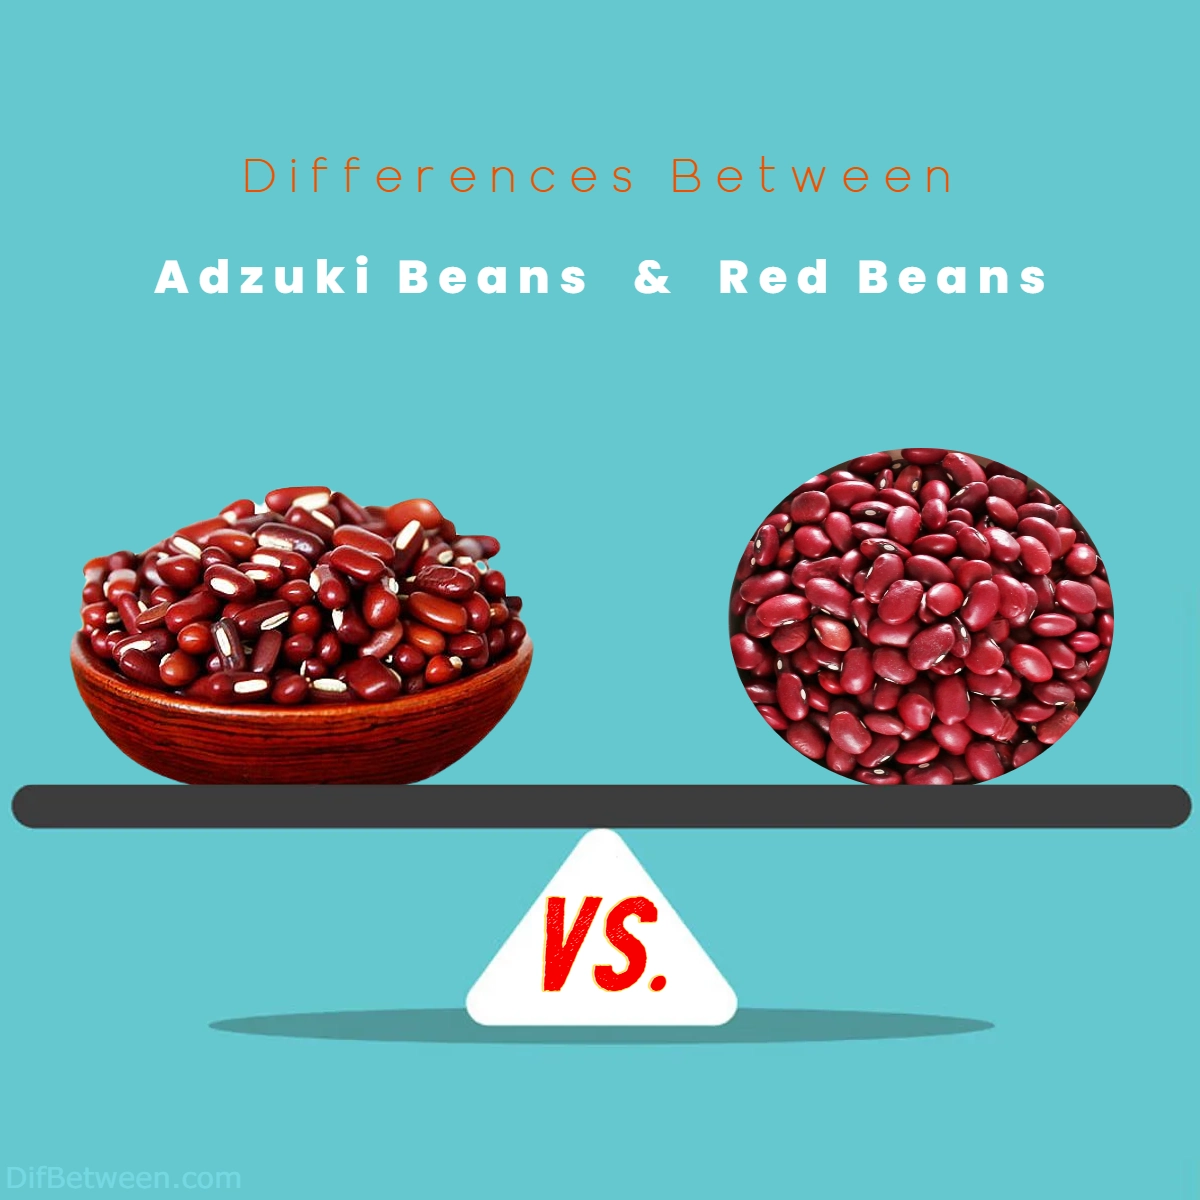 Difference Between Adzuki Beans and Red Beans